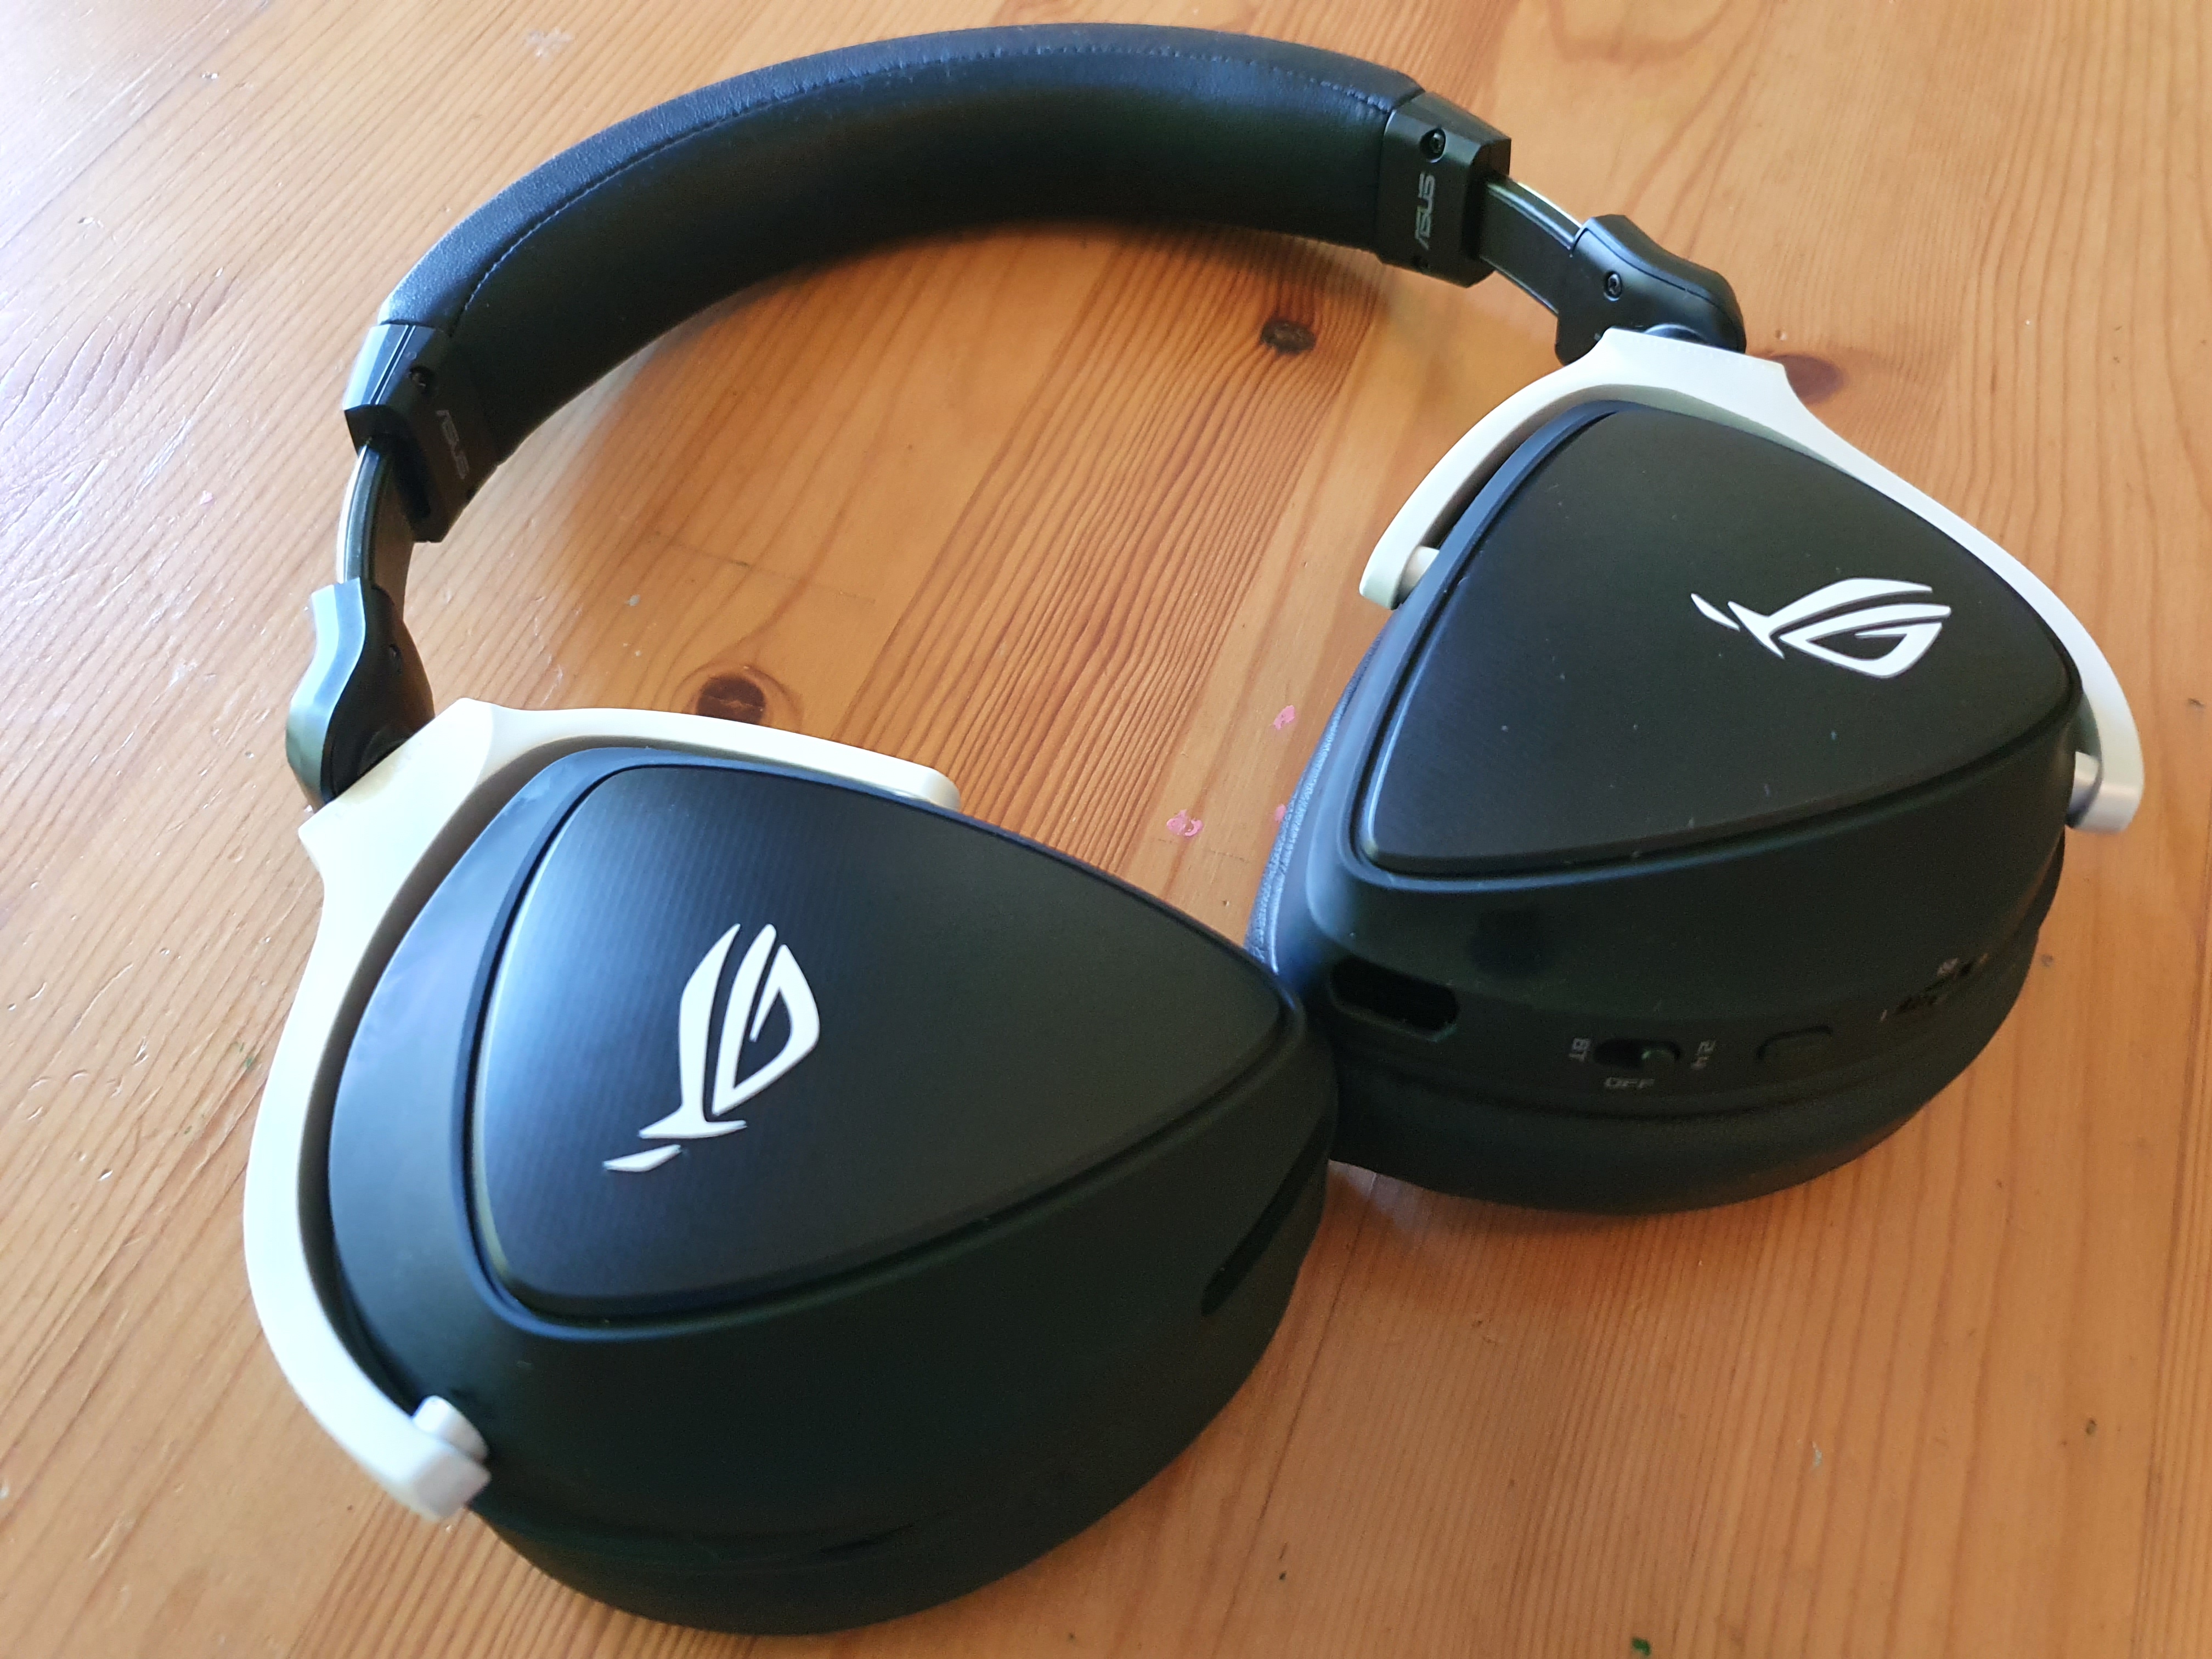 Audeze Maxwell Wireless review: A luxe gaming headset for audiophiles